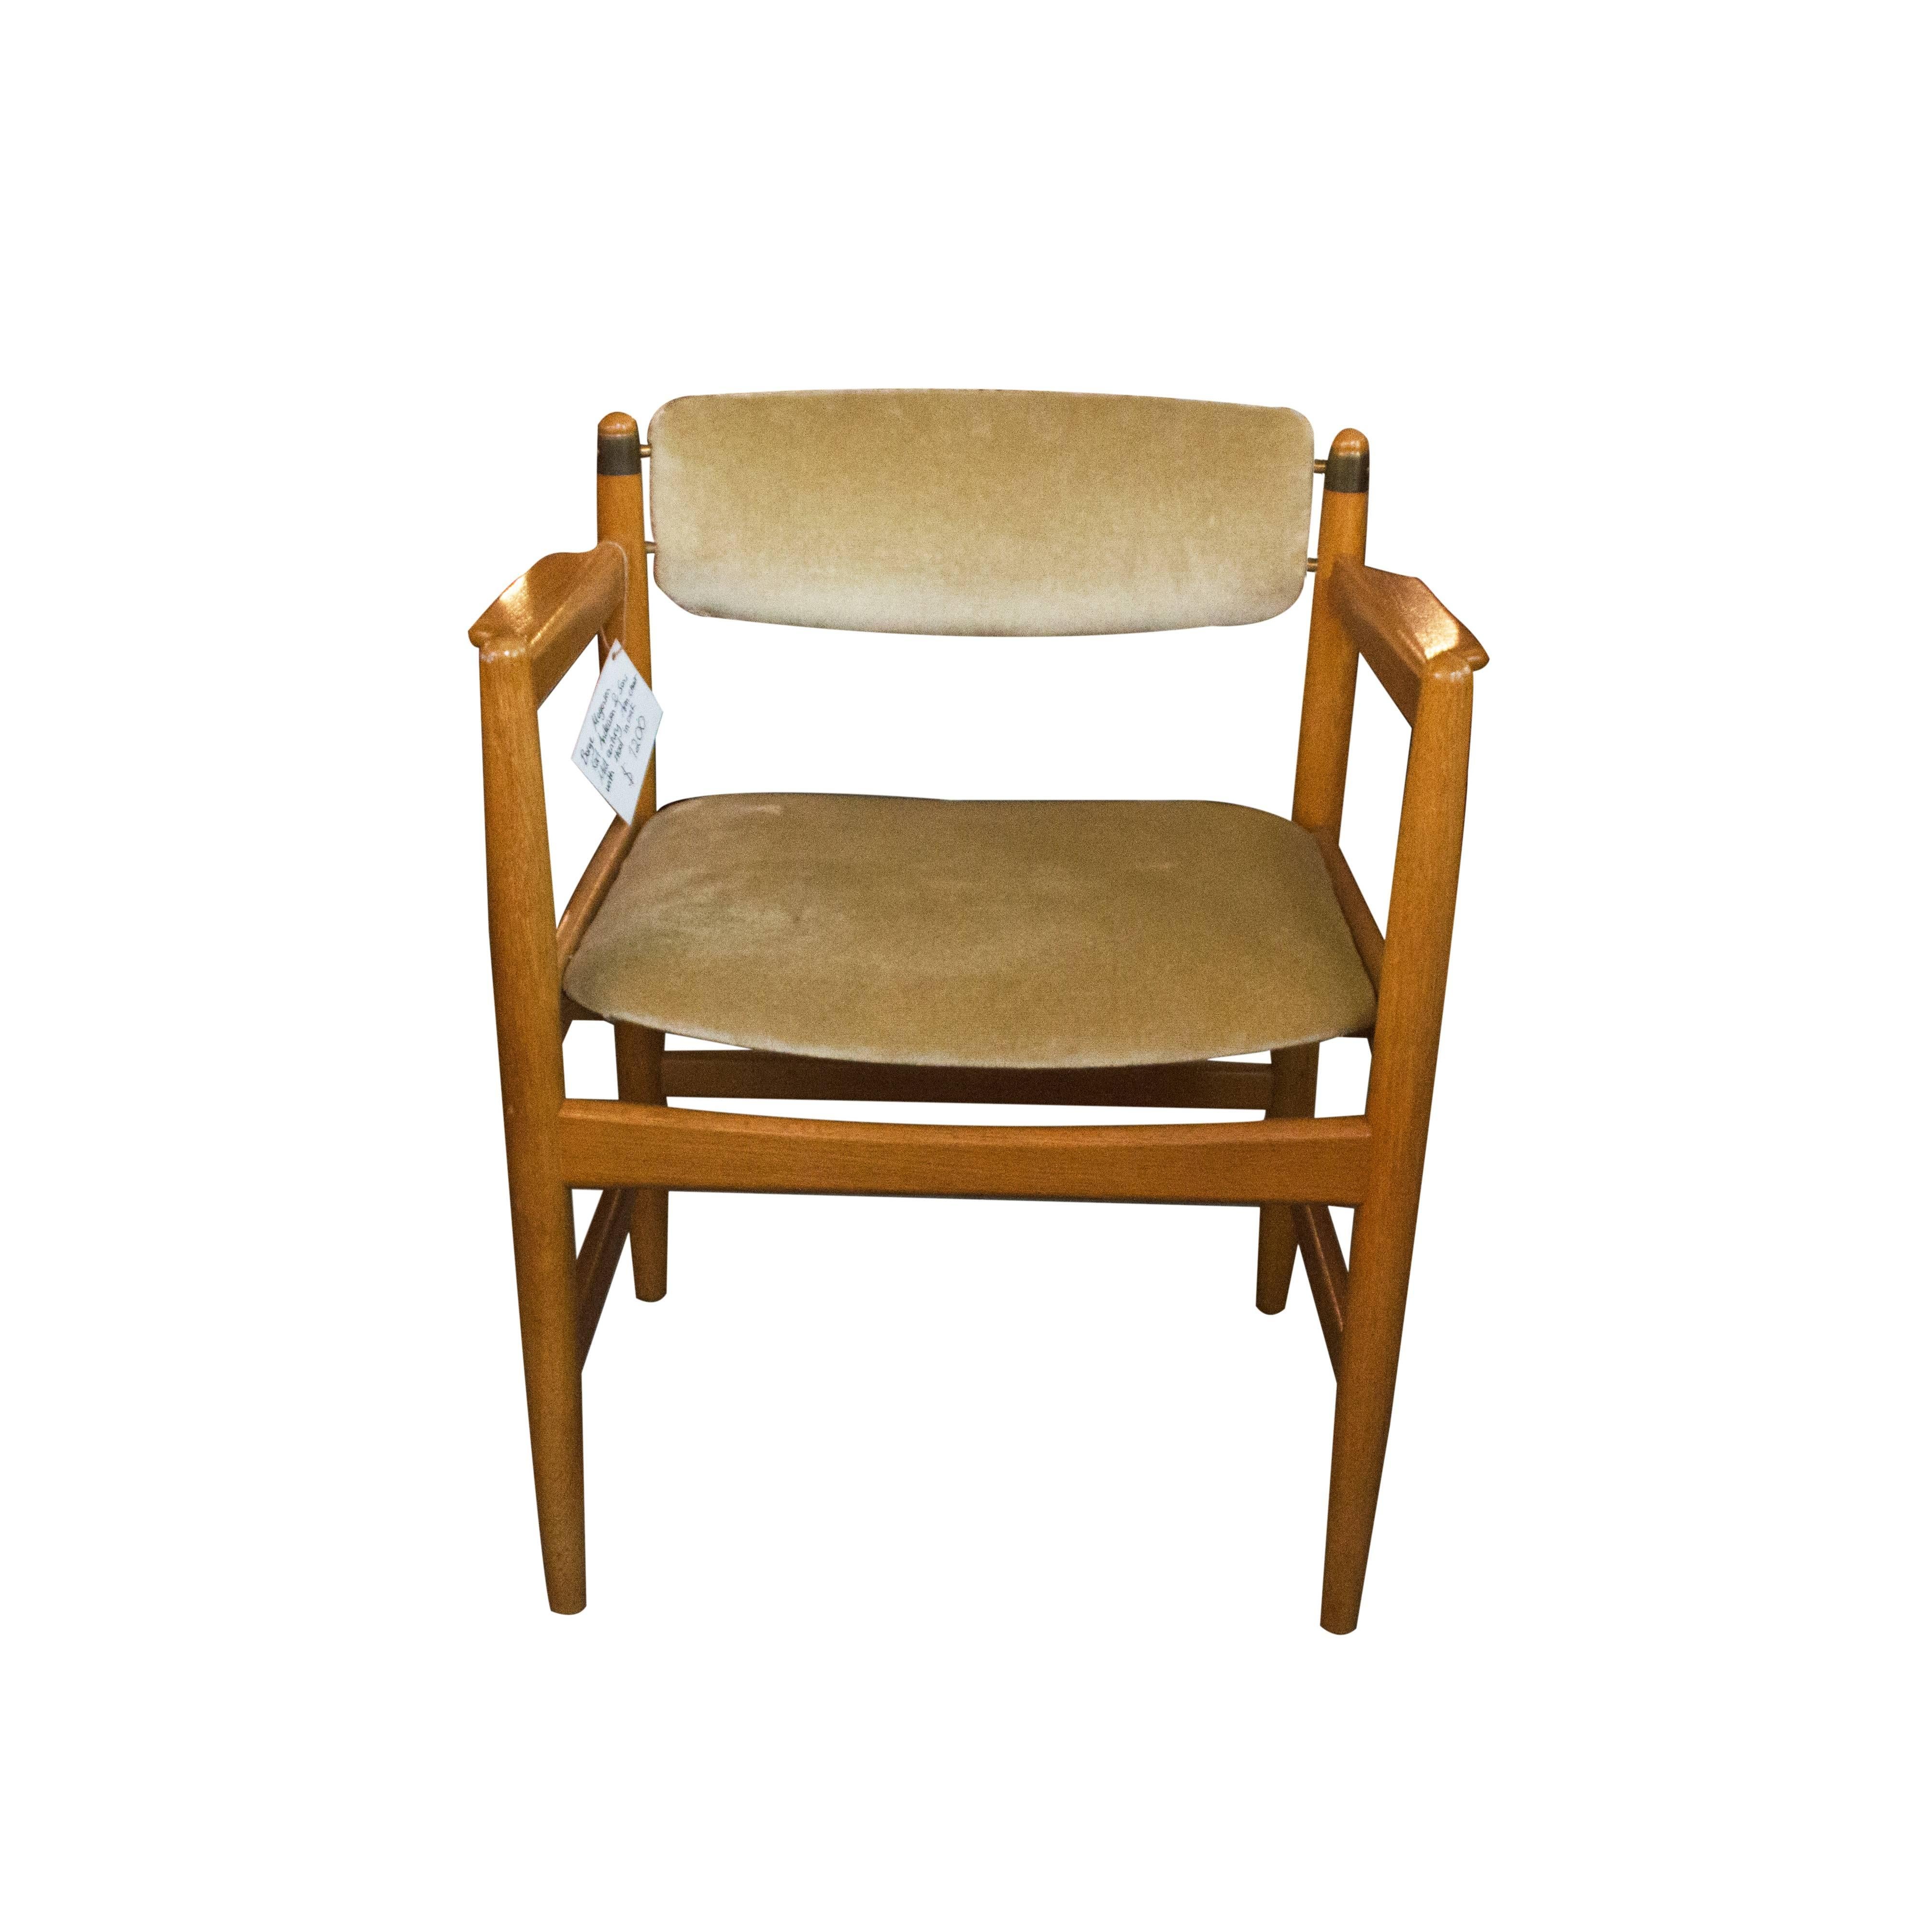 Stunning lounge chair with beautifully carved arm rests with brass details. The fabric is not original and can be changed to your favourite look, why not leather?

Børge Mogensen (Denmark, 1914-1972)
Among the great mid-20th century Danish